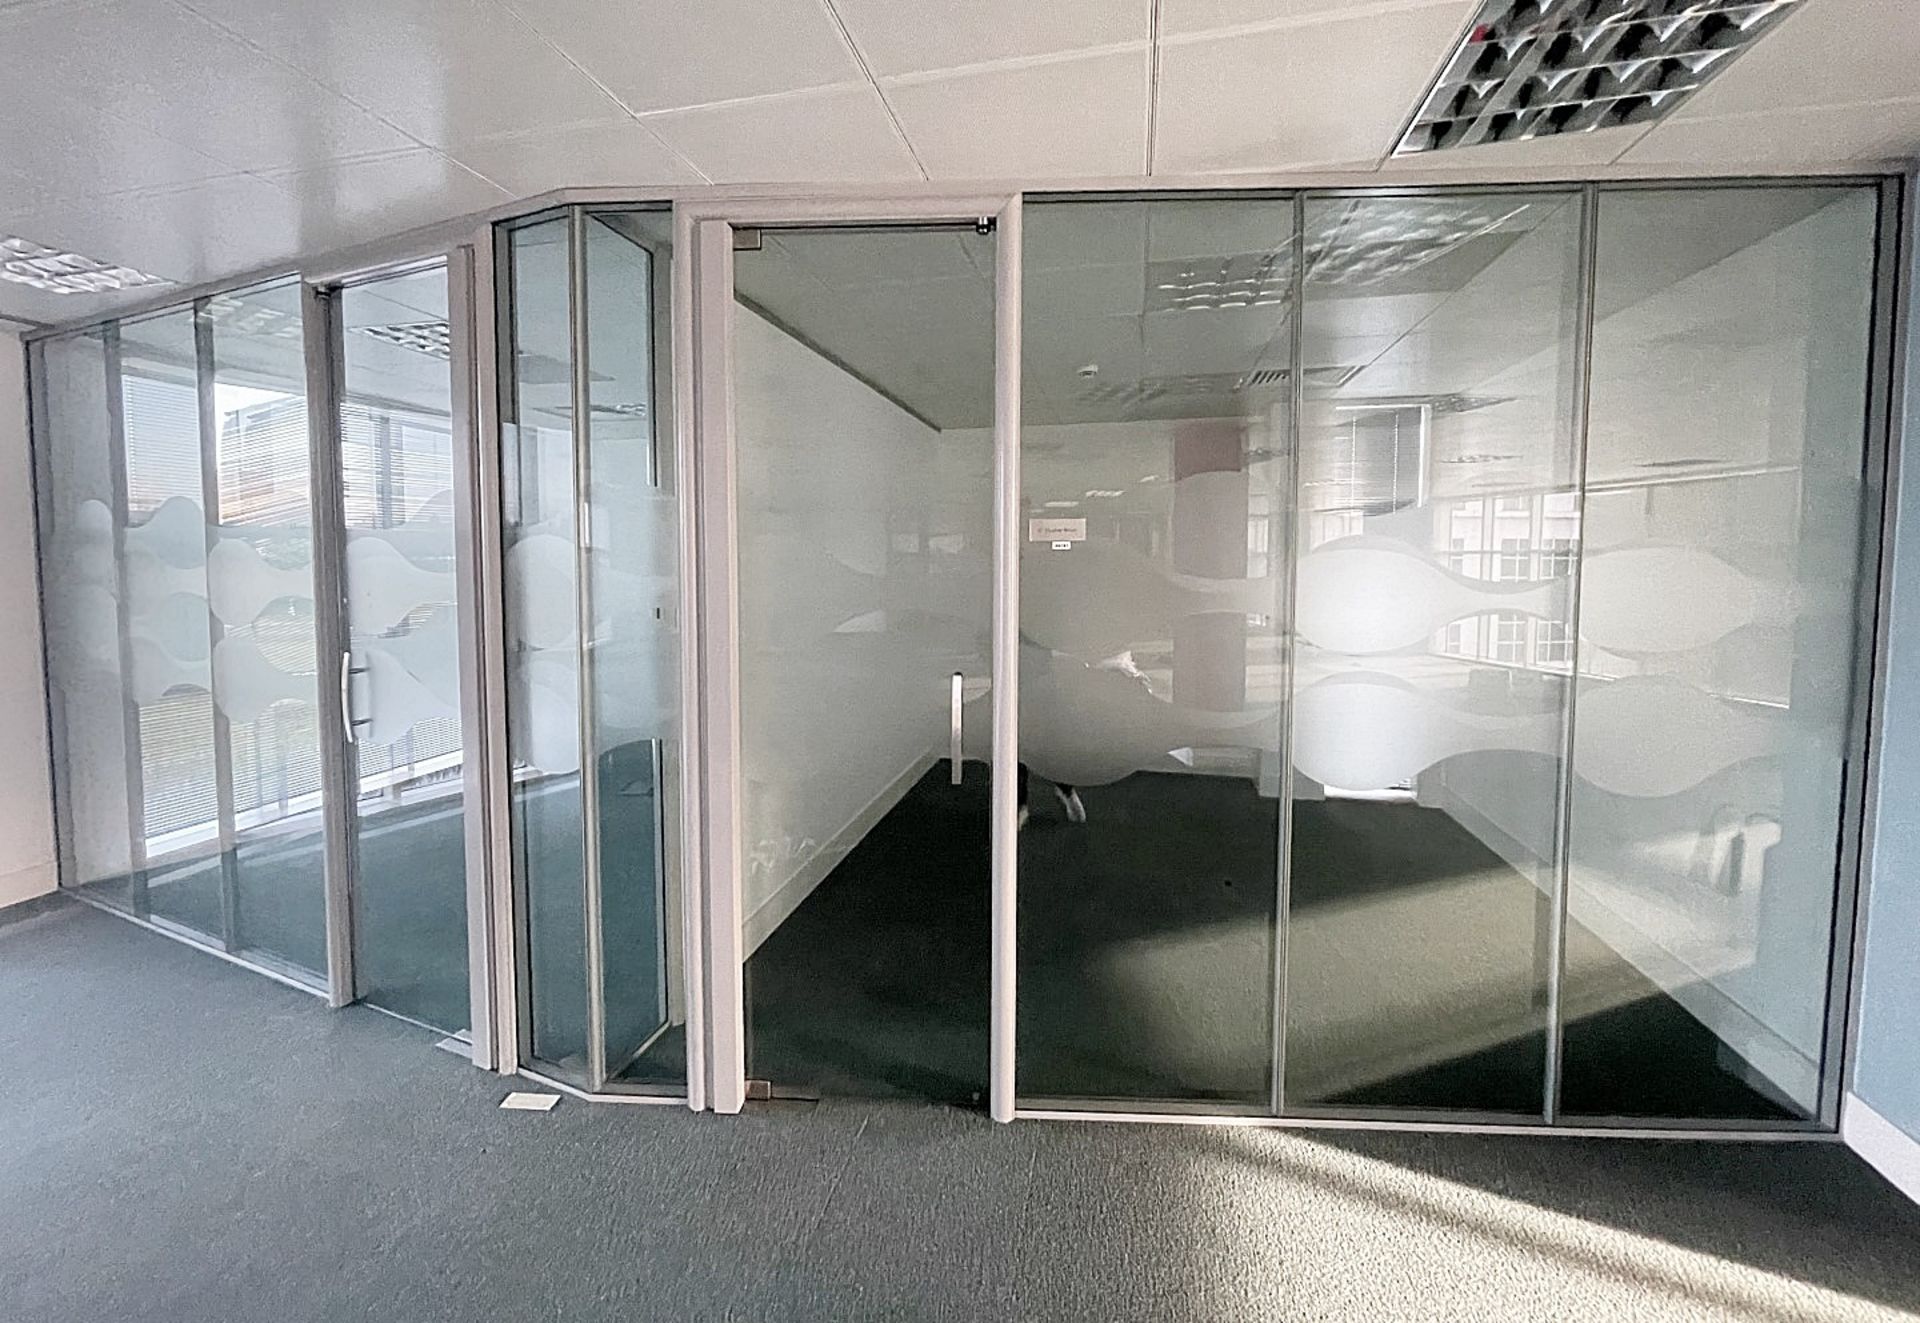 12 x Assorted Glass Partition Panels And Doors - Covers An Area Of 7.3 Metres Across, Height